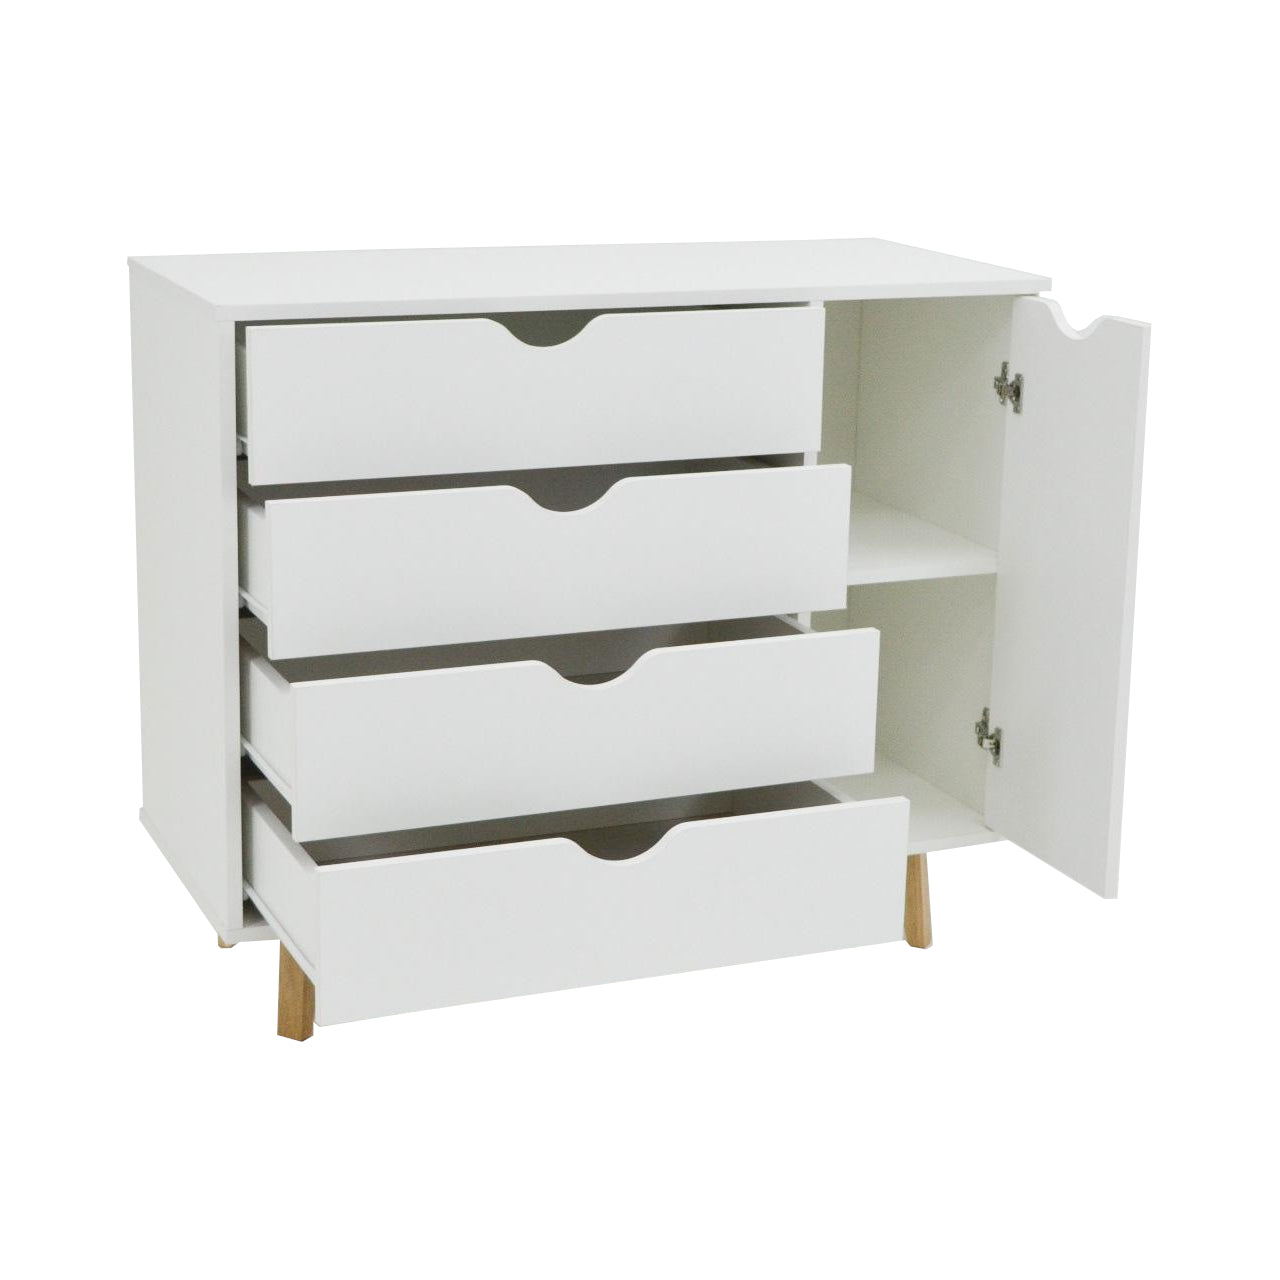 35" White Solid Wood Four Drawer Combo Dresser